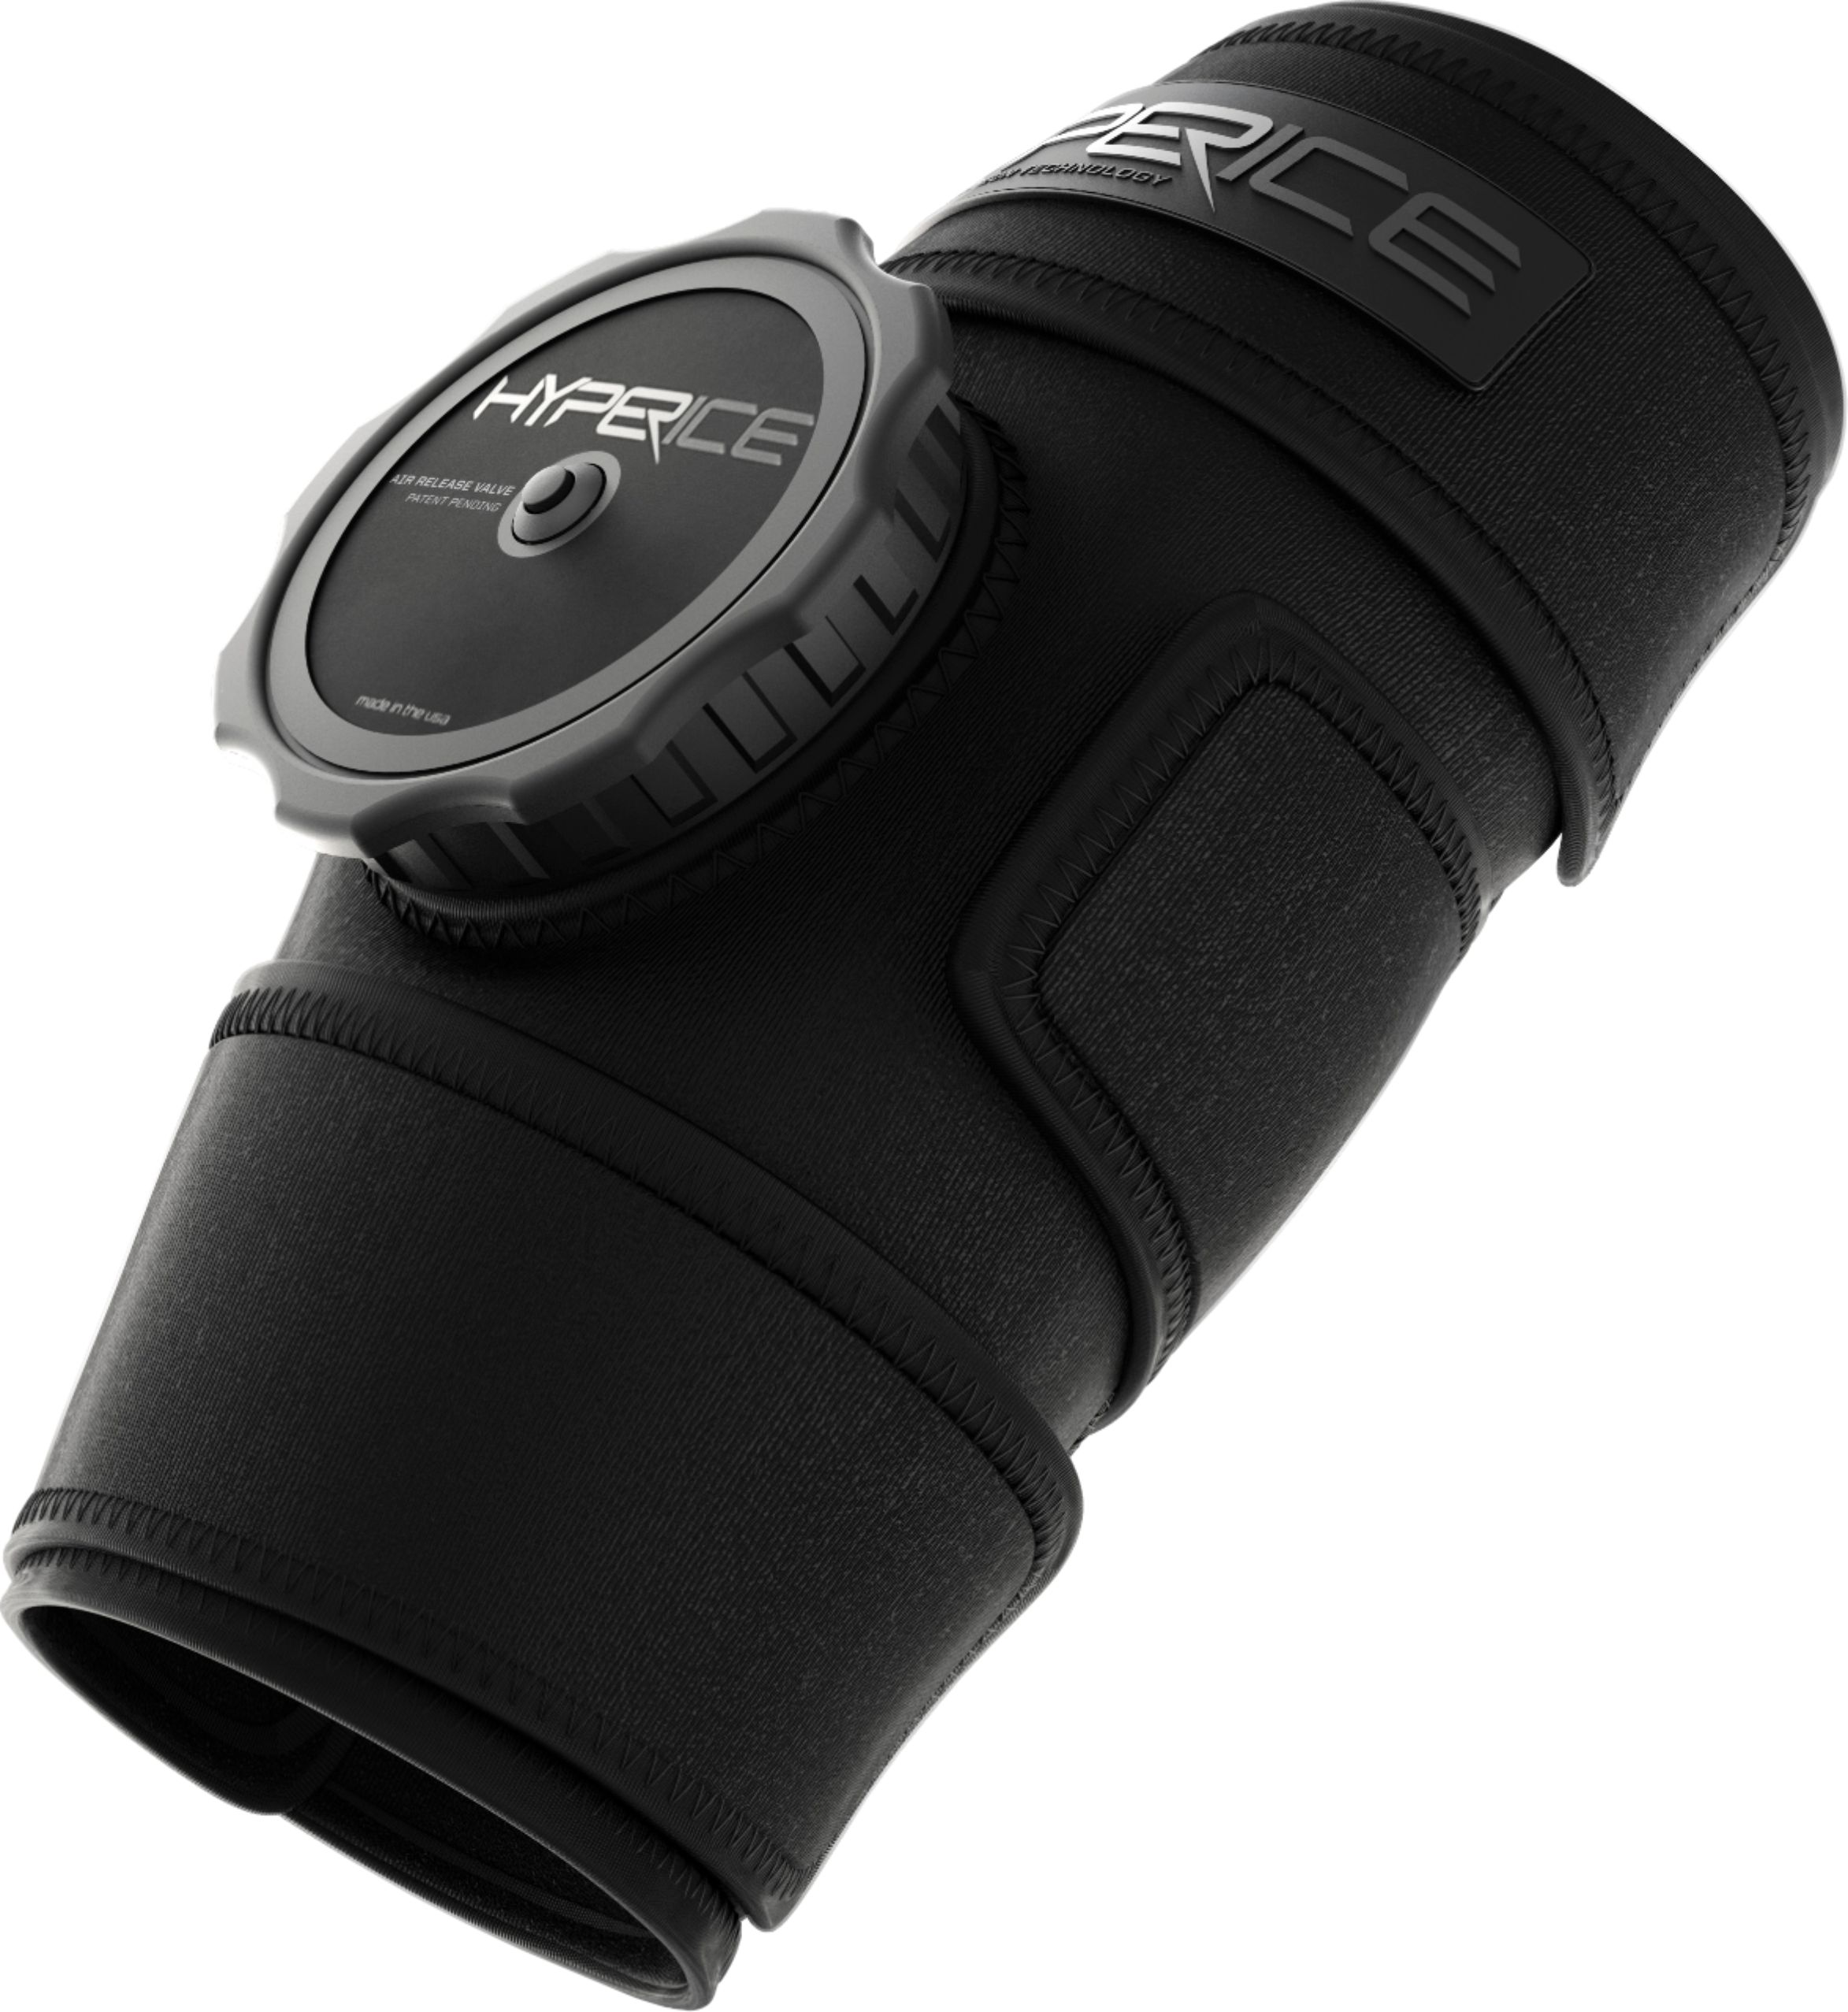 Left View: Hyperice Utility Ice Compression Wearable - Black